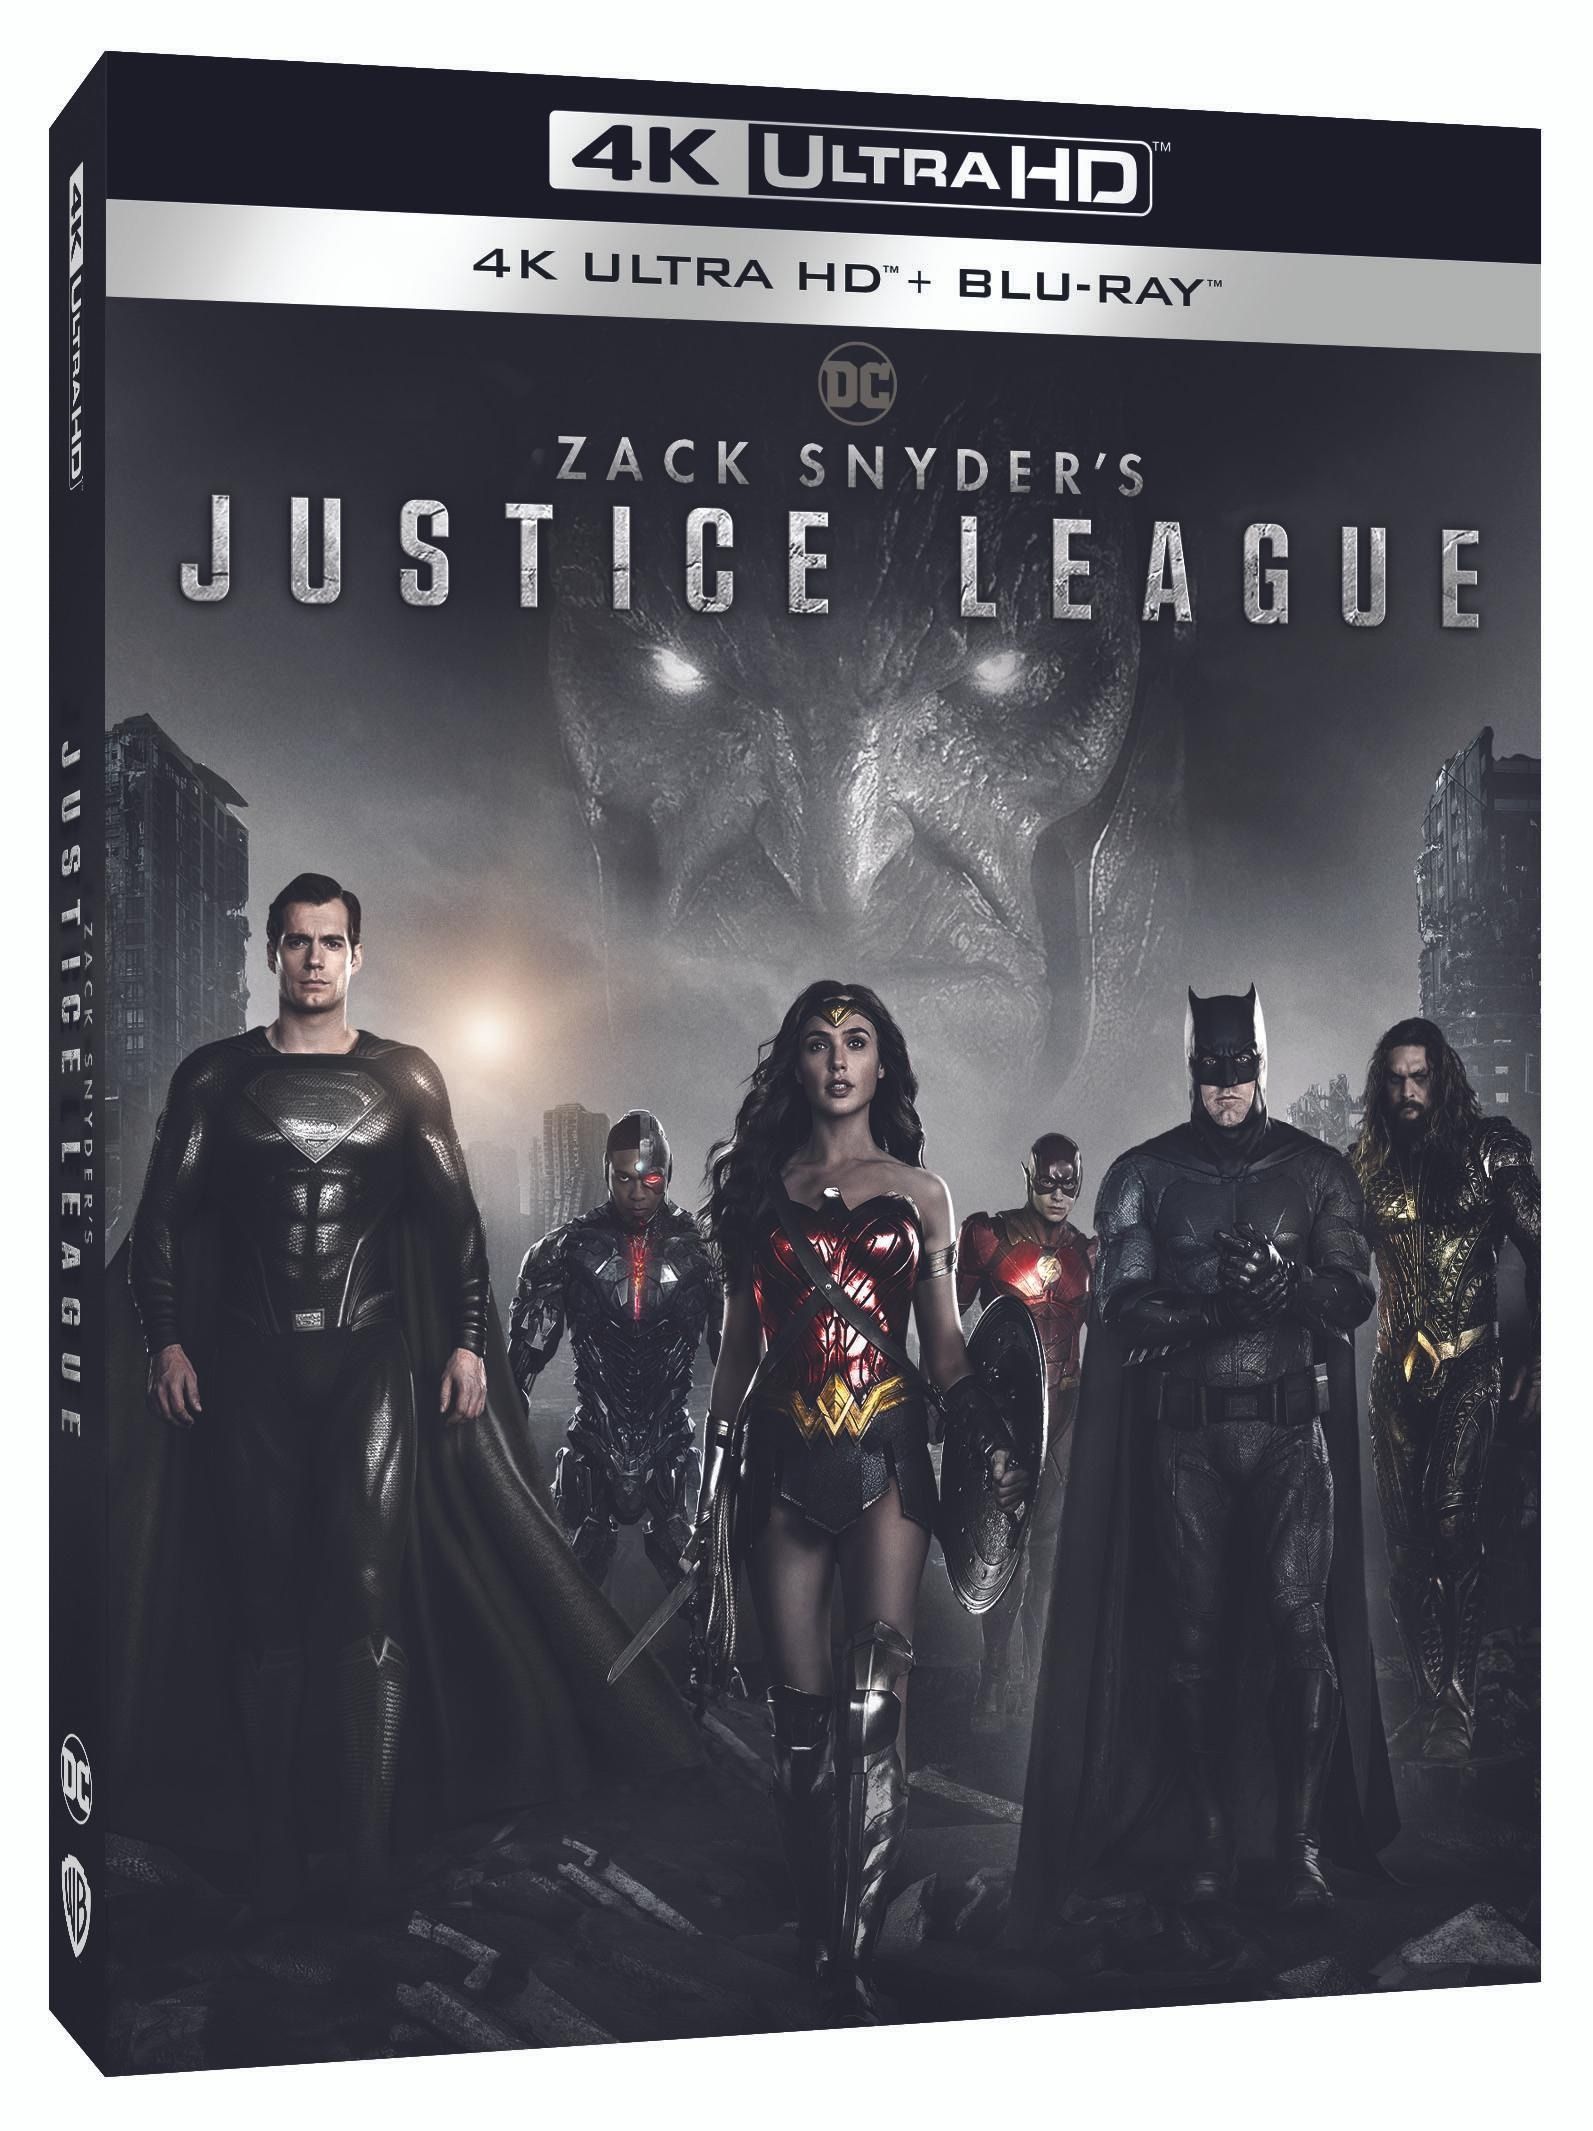 Zack Snyder's Justice League Coming to 4k Ultra HD Blu-ray